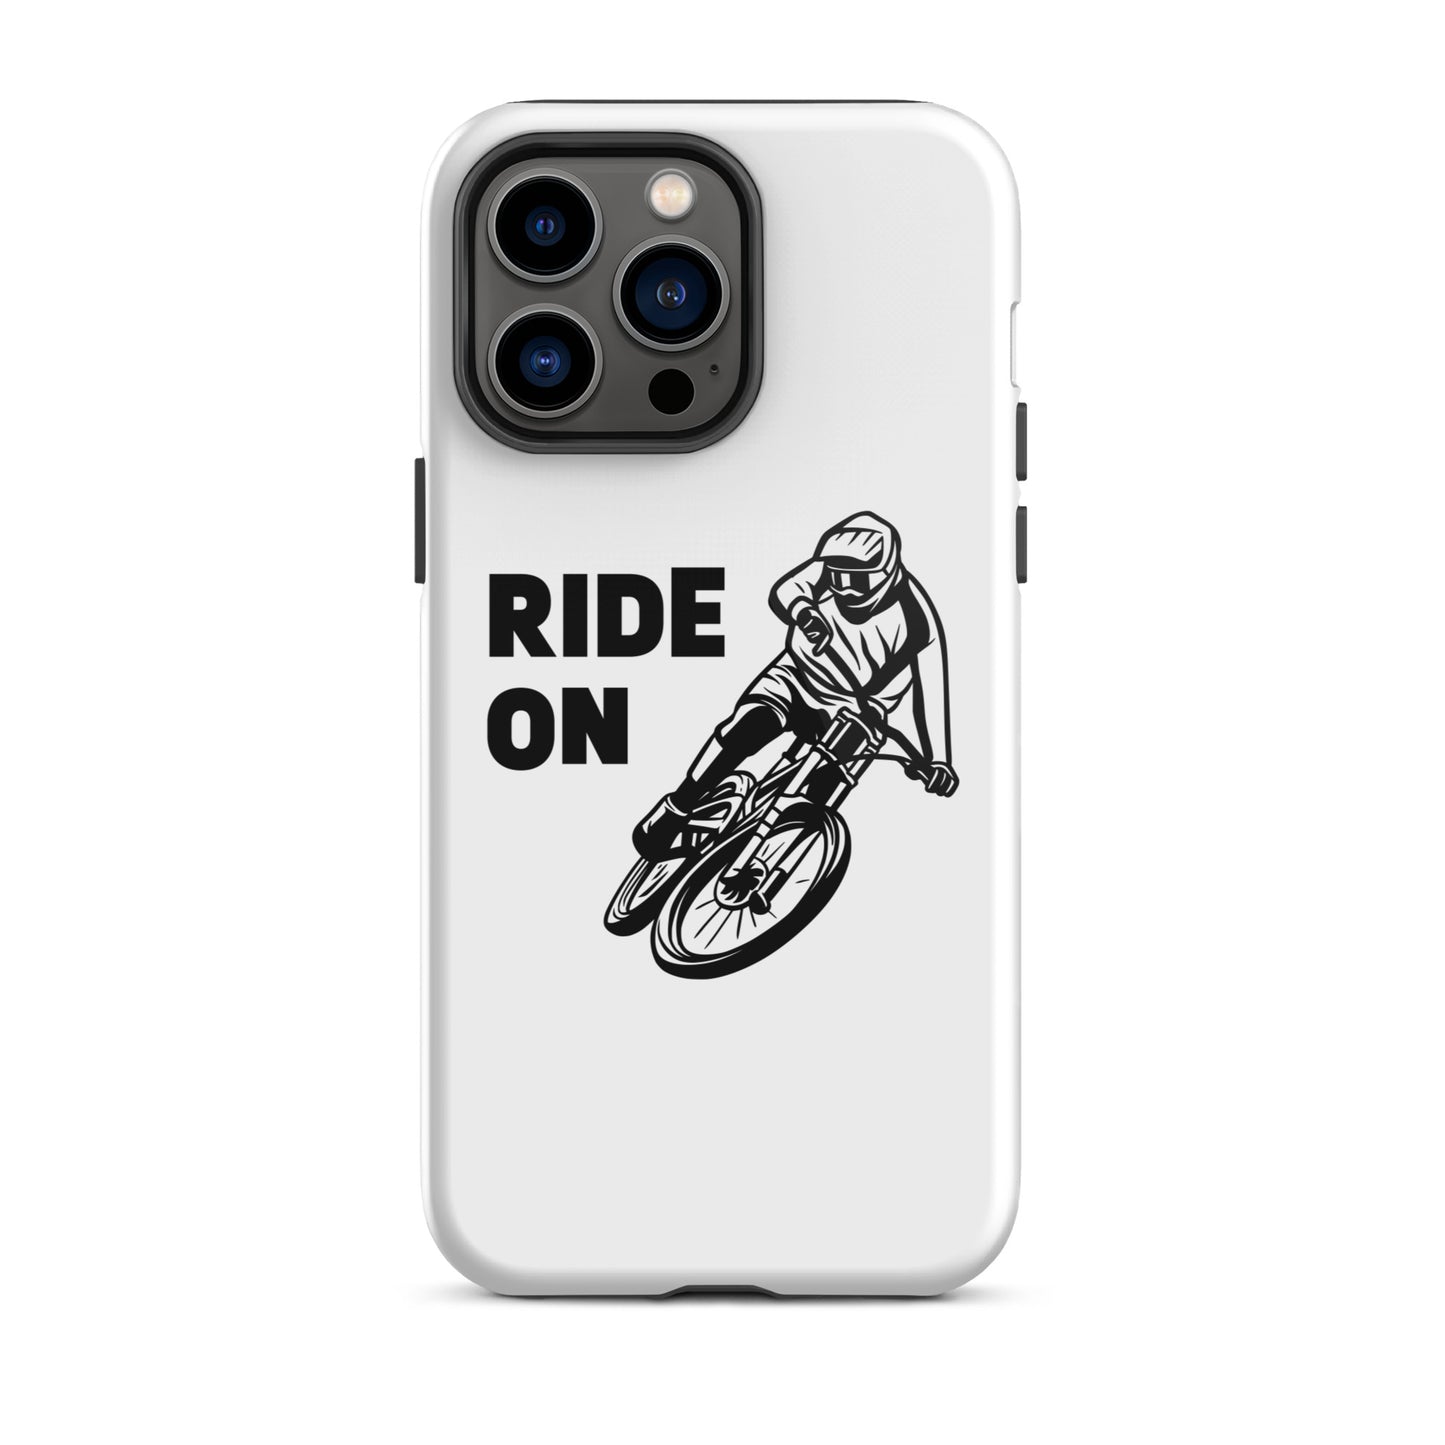 Ride On - Tough iPhone case